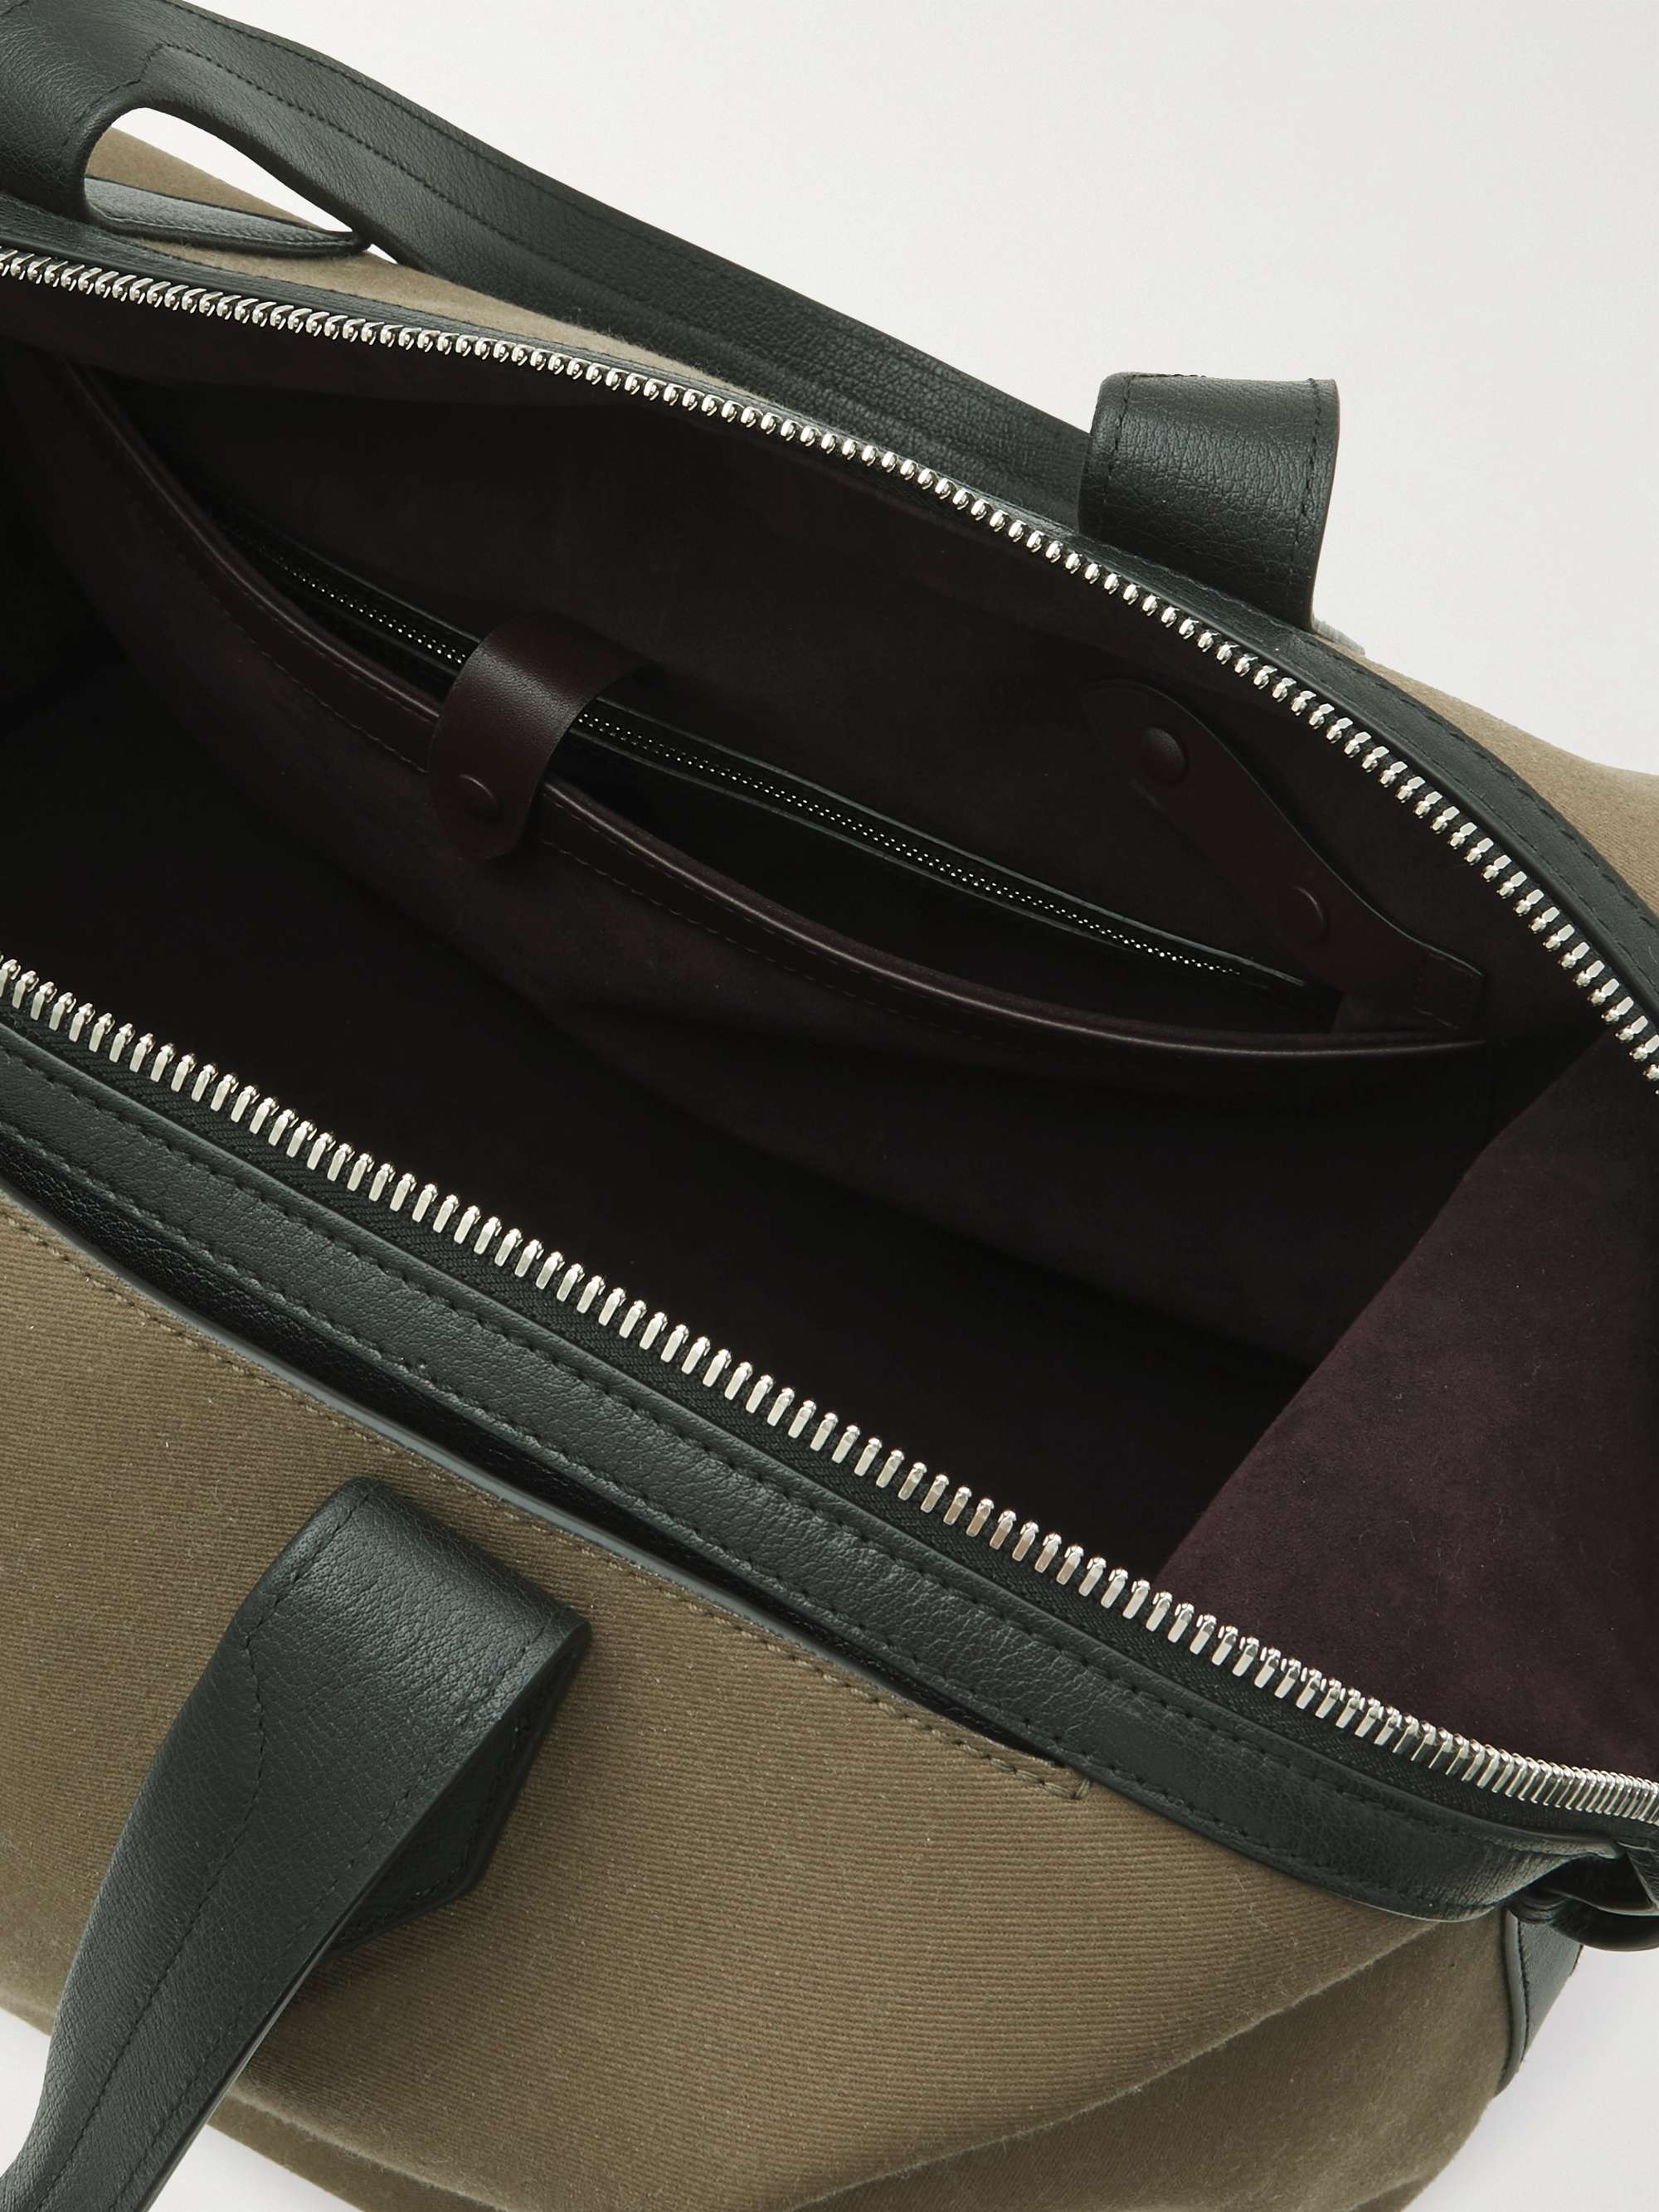 MÉTIER Nomad Leather-Trimmed Coated-Twill Weekend Bag